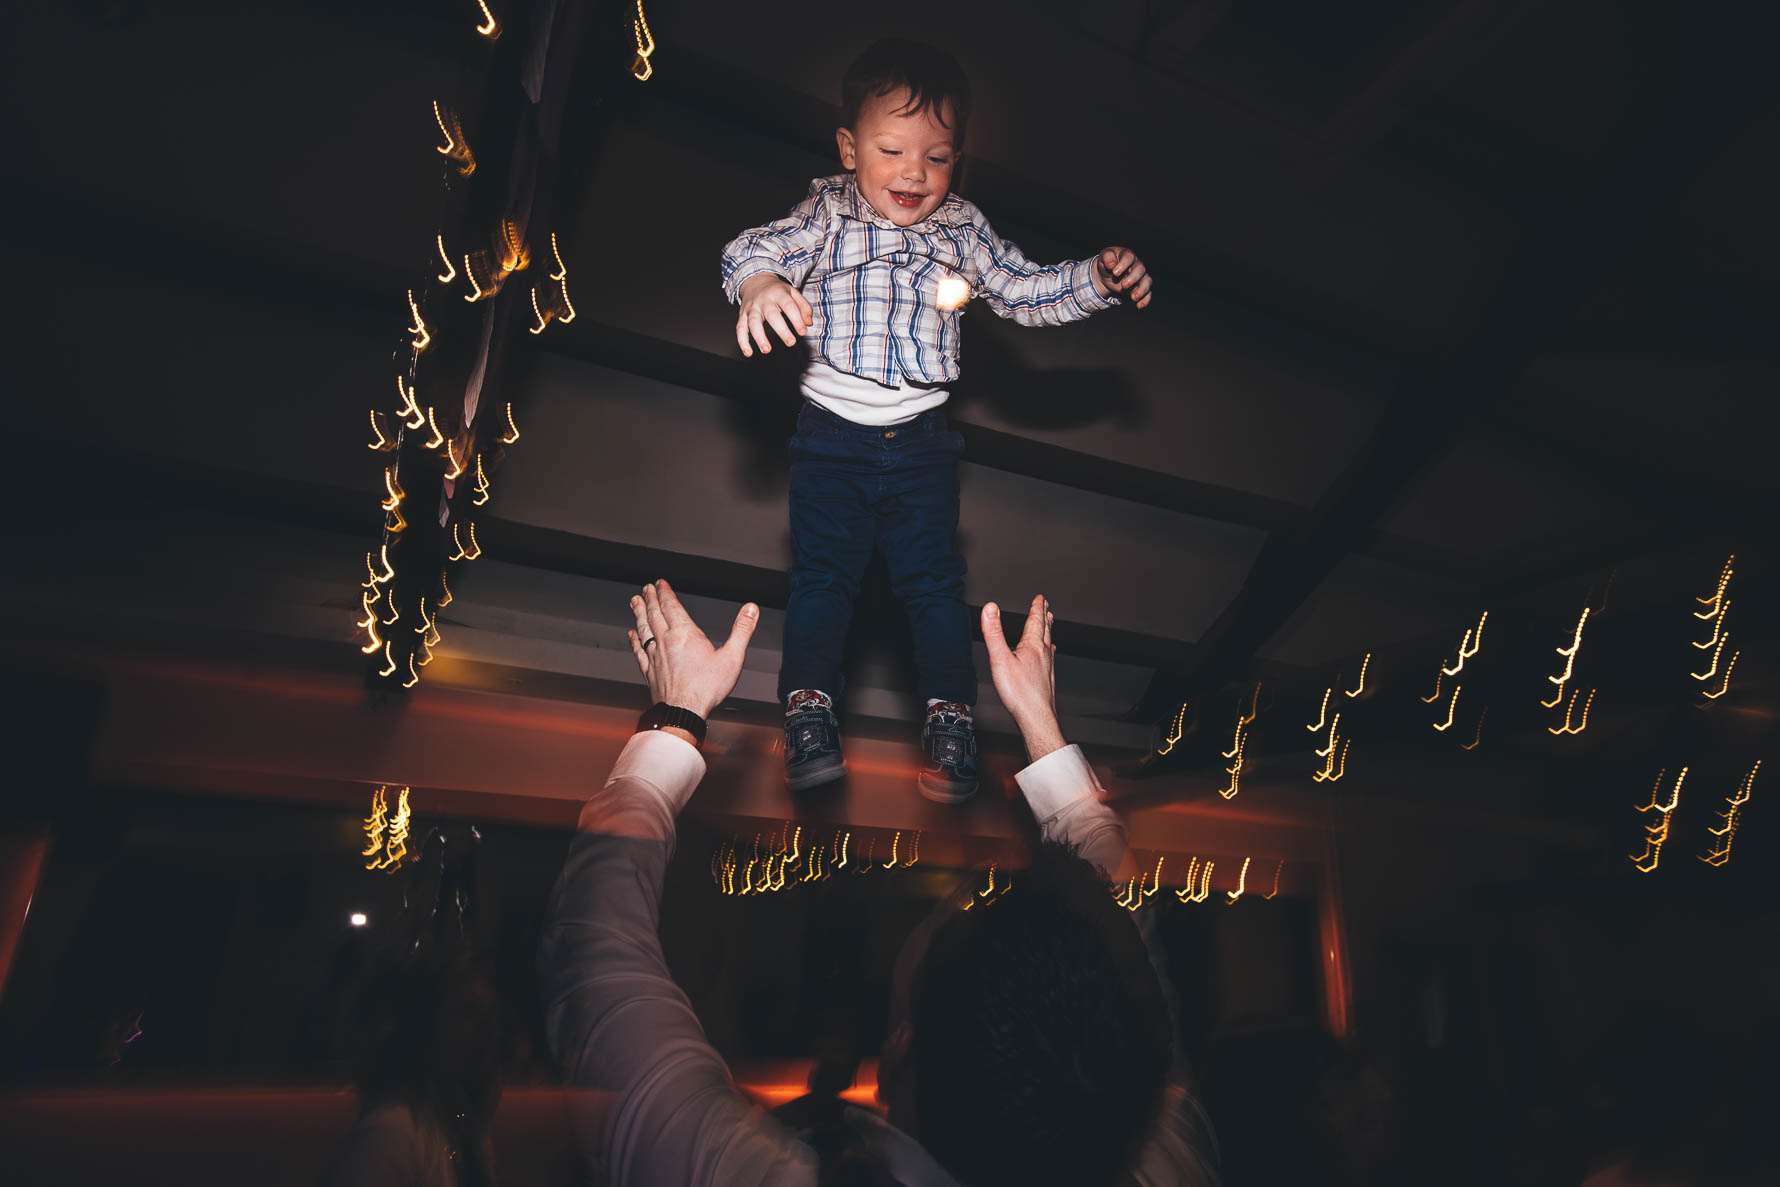 boy gets thrown in the air on the dance floor